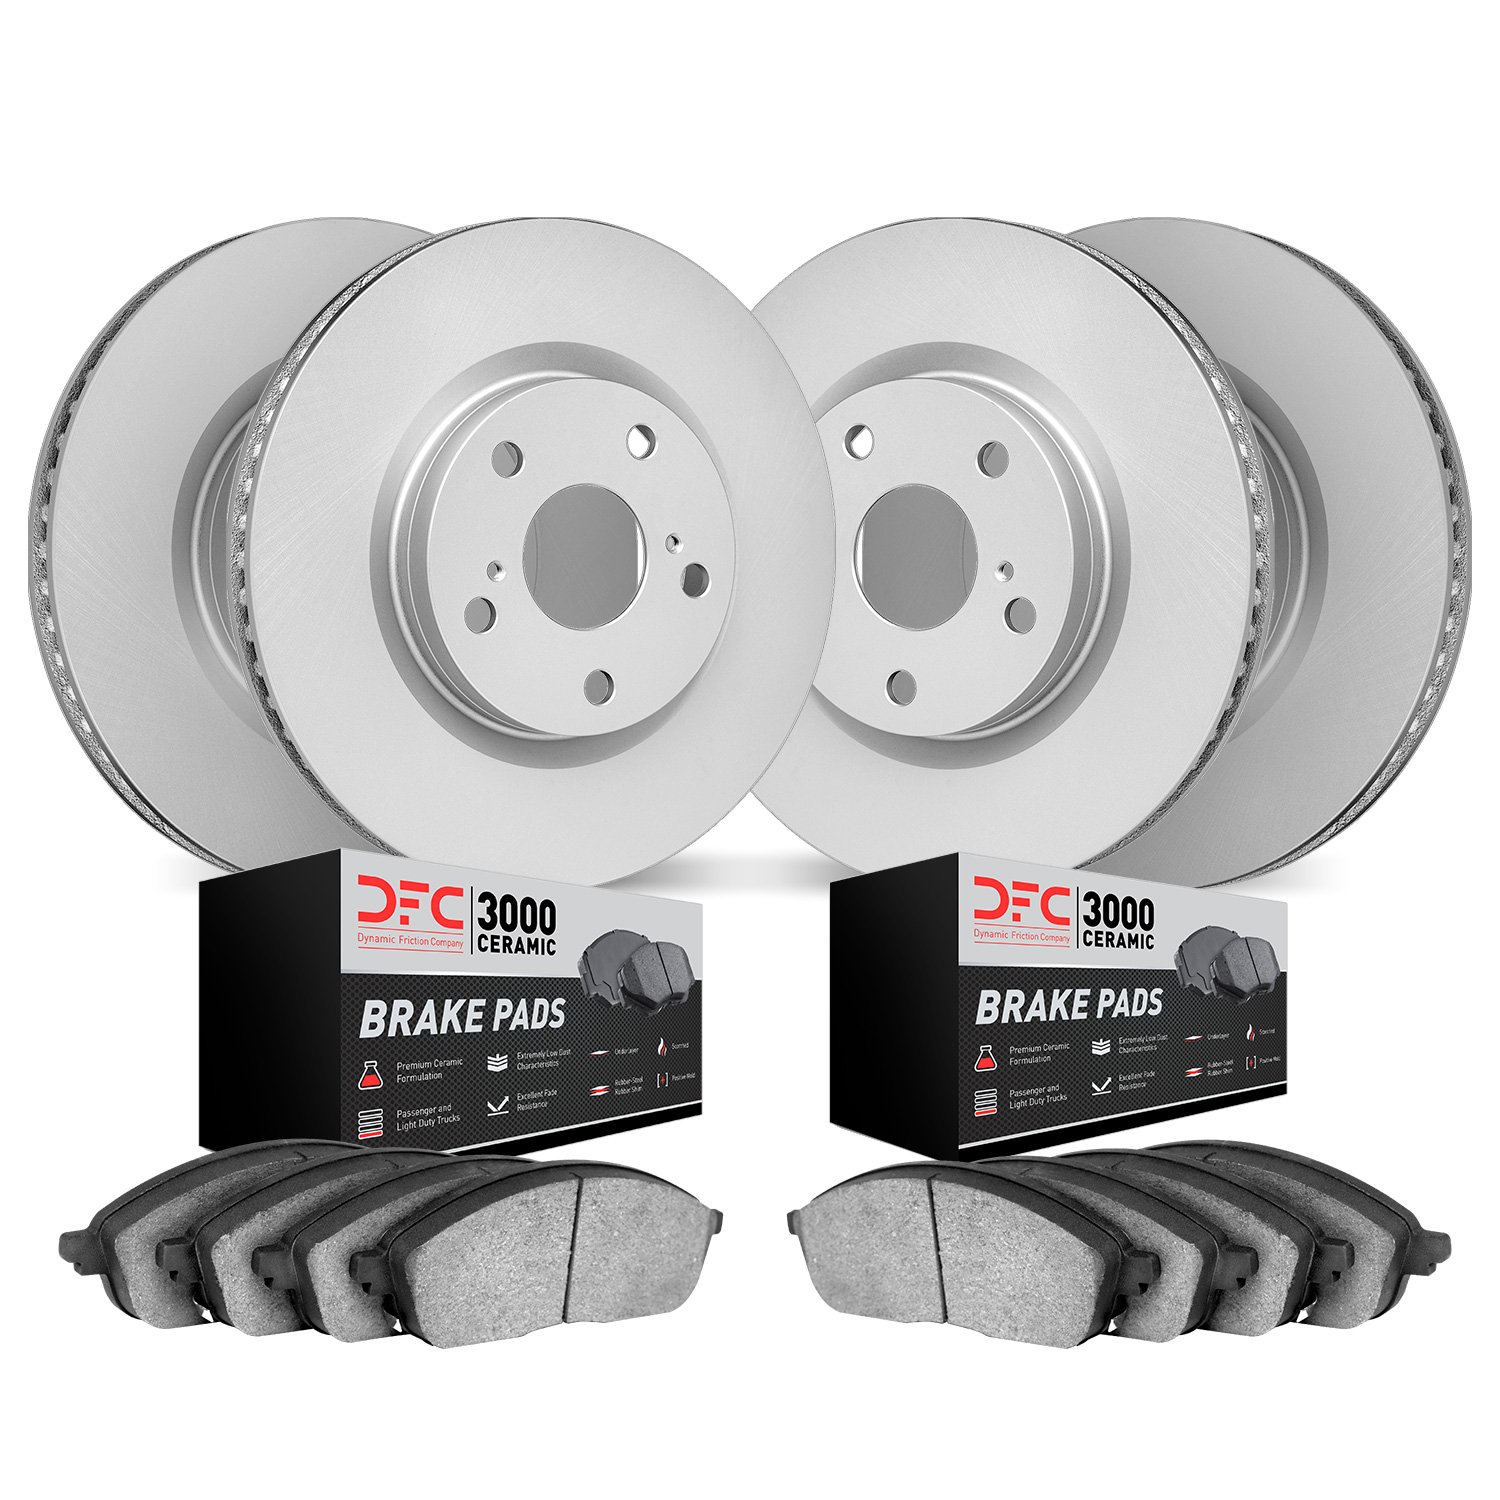 4304-31044 Geospec Brake Rotors with 3000-Series Ceramic Brake Pads Kit, 2008-2013 BMW, Position: Front and Rear